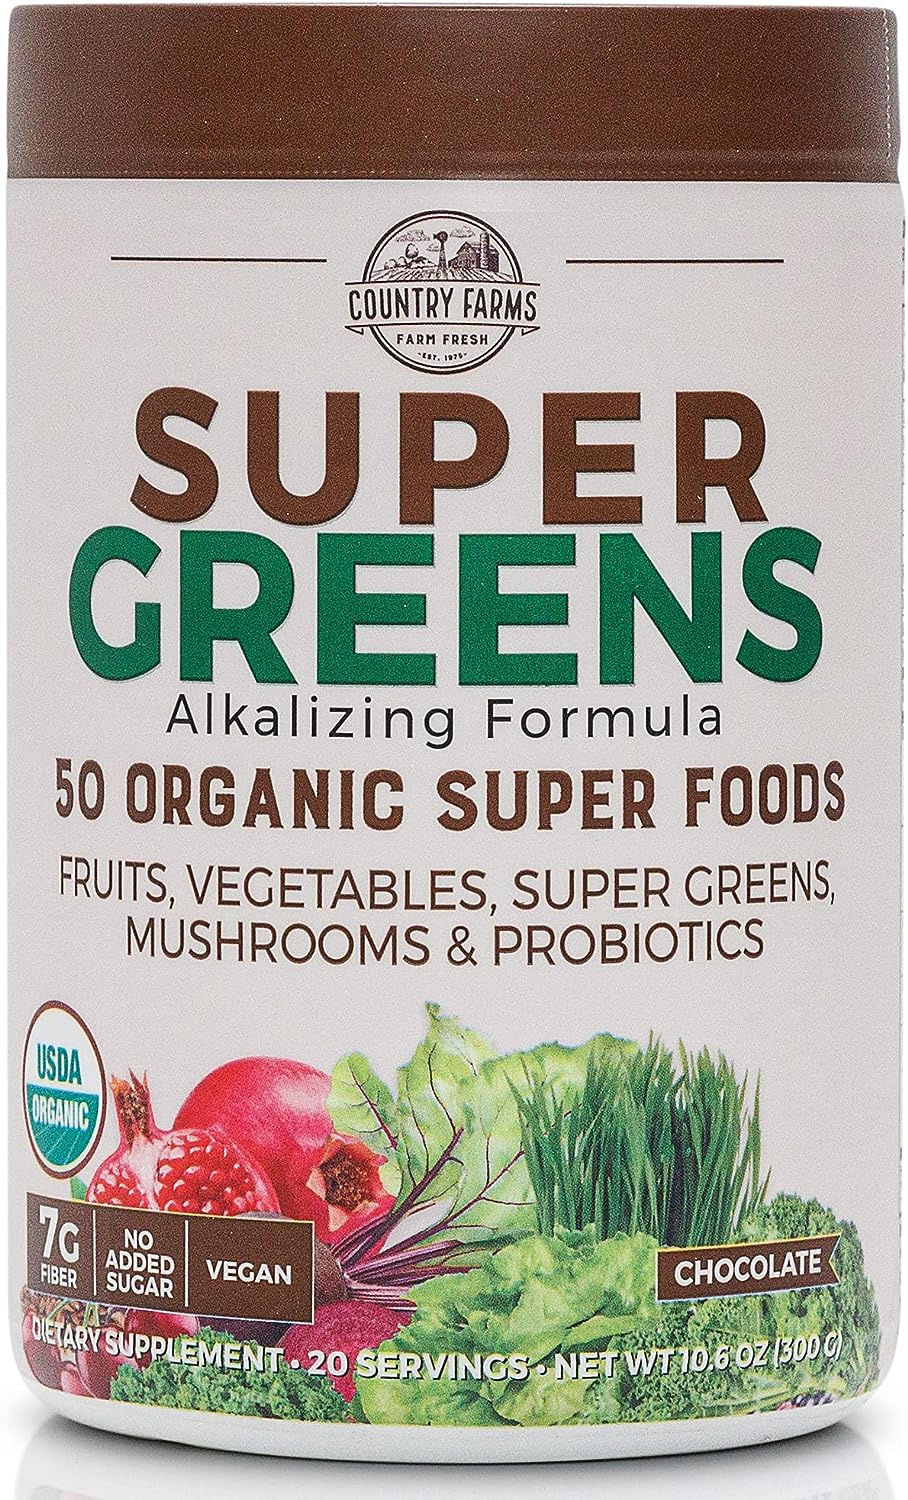 Country Farms Super Greens Flavor, 50 Organic Super Foods, USDA Organic Drink Mix, 20 Servings (Packaging May Vary), (N9880) Chocolate, 10.6 Oz